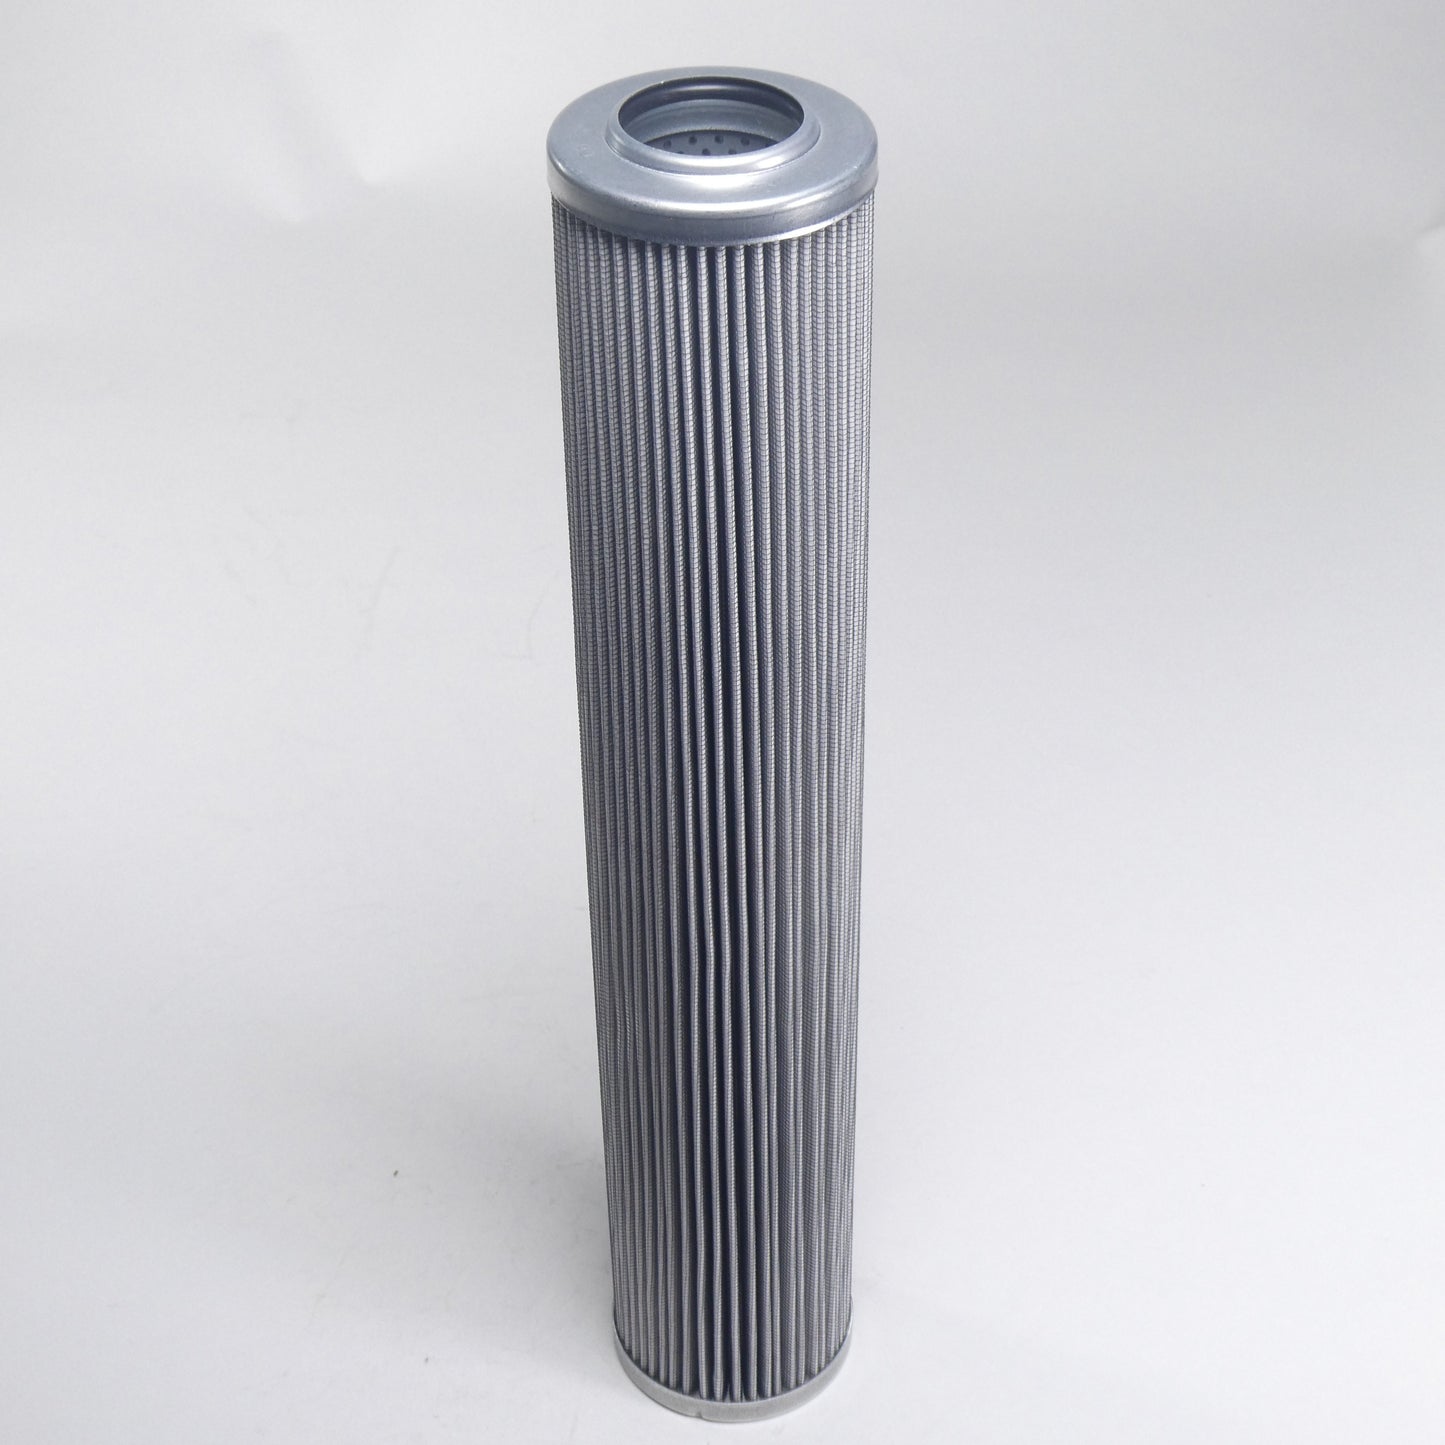 Hydrafil Replacement Filter Element for Hilco 3830-14-017-C